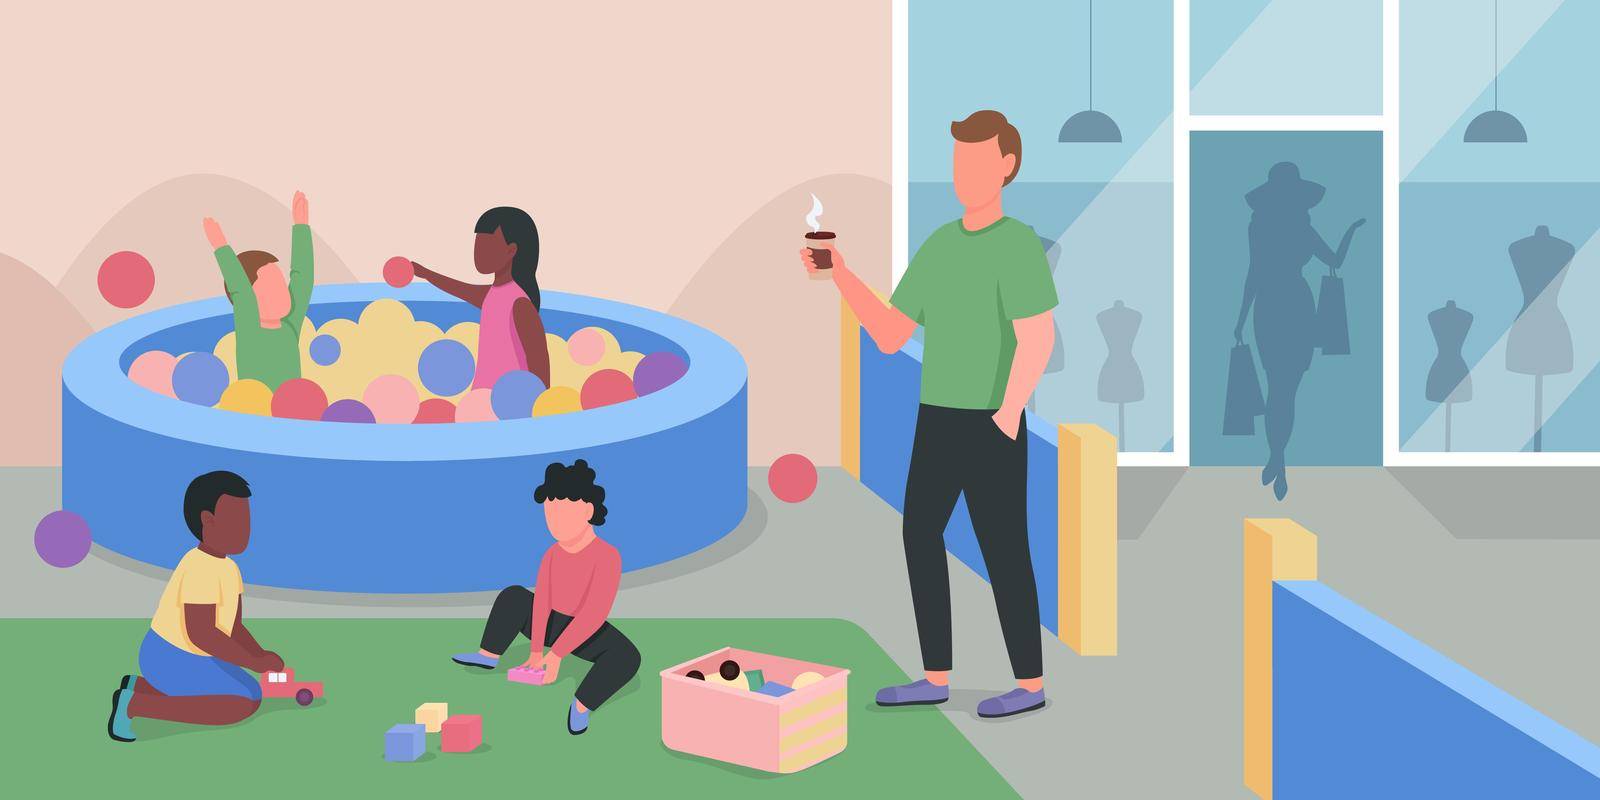 Shopping mall playground flat color vector illustration. Kids having fun in pool with plastic balls. Children and adult supervisor 2D cartoon characters with supermarket playzone on background